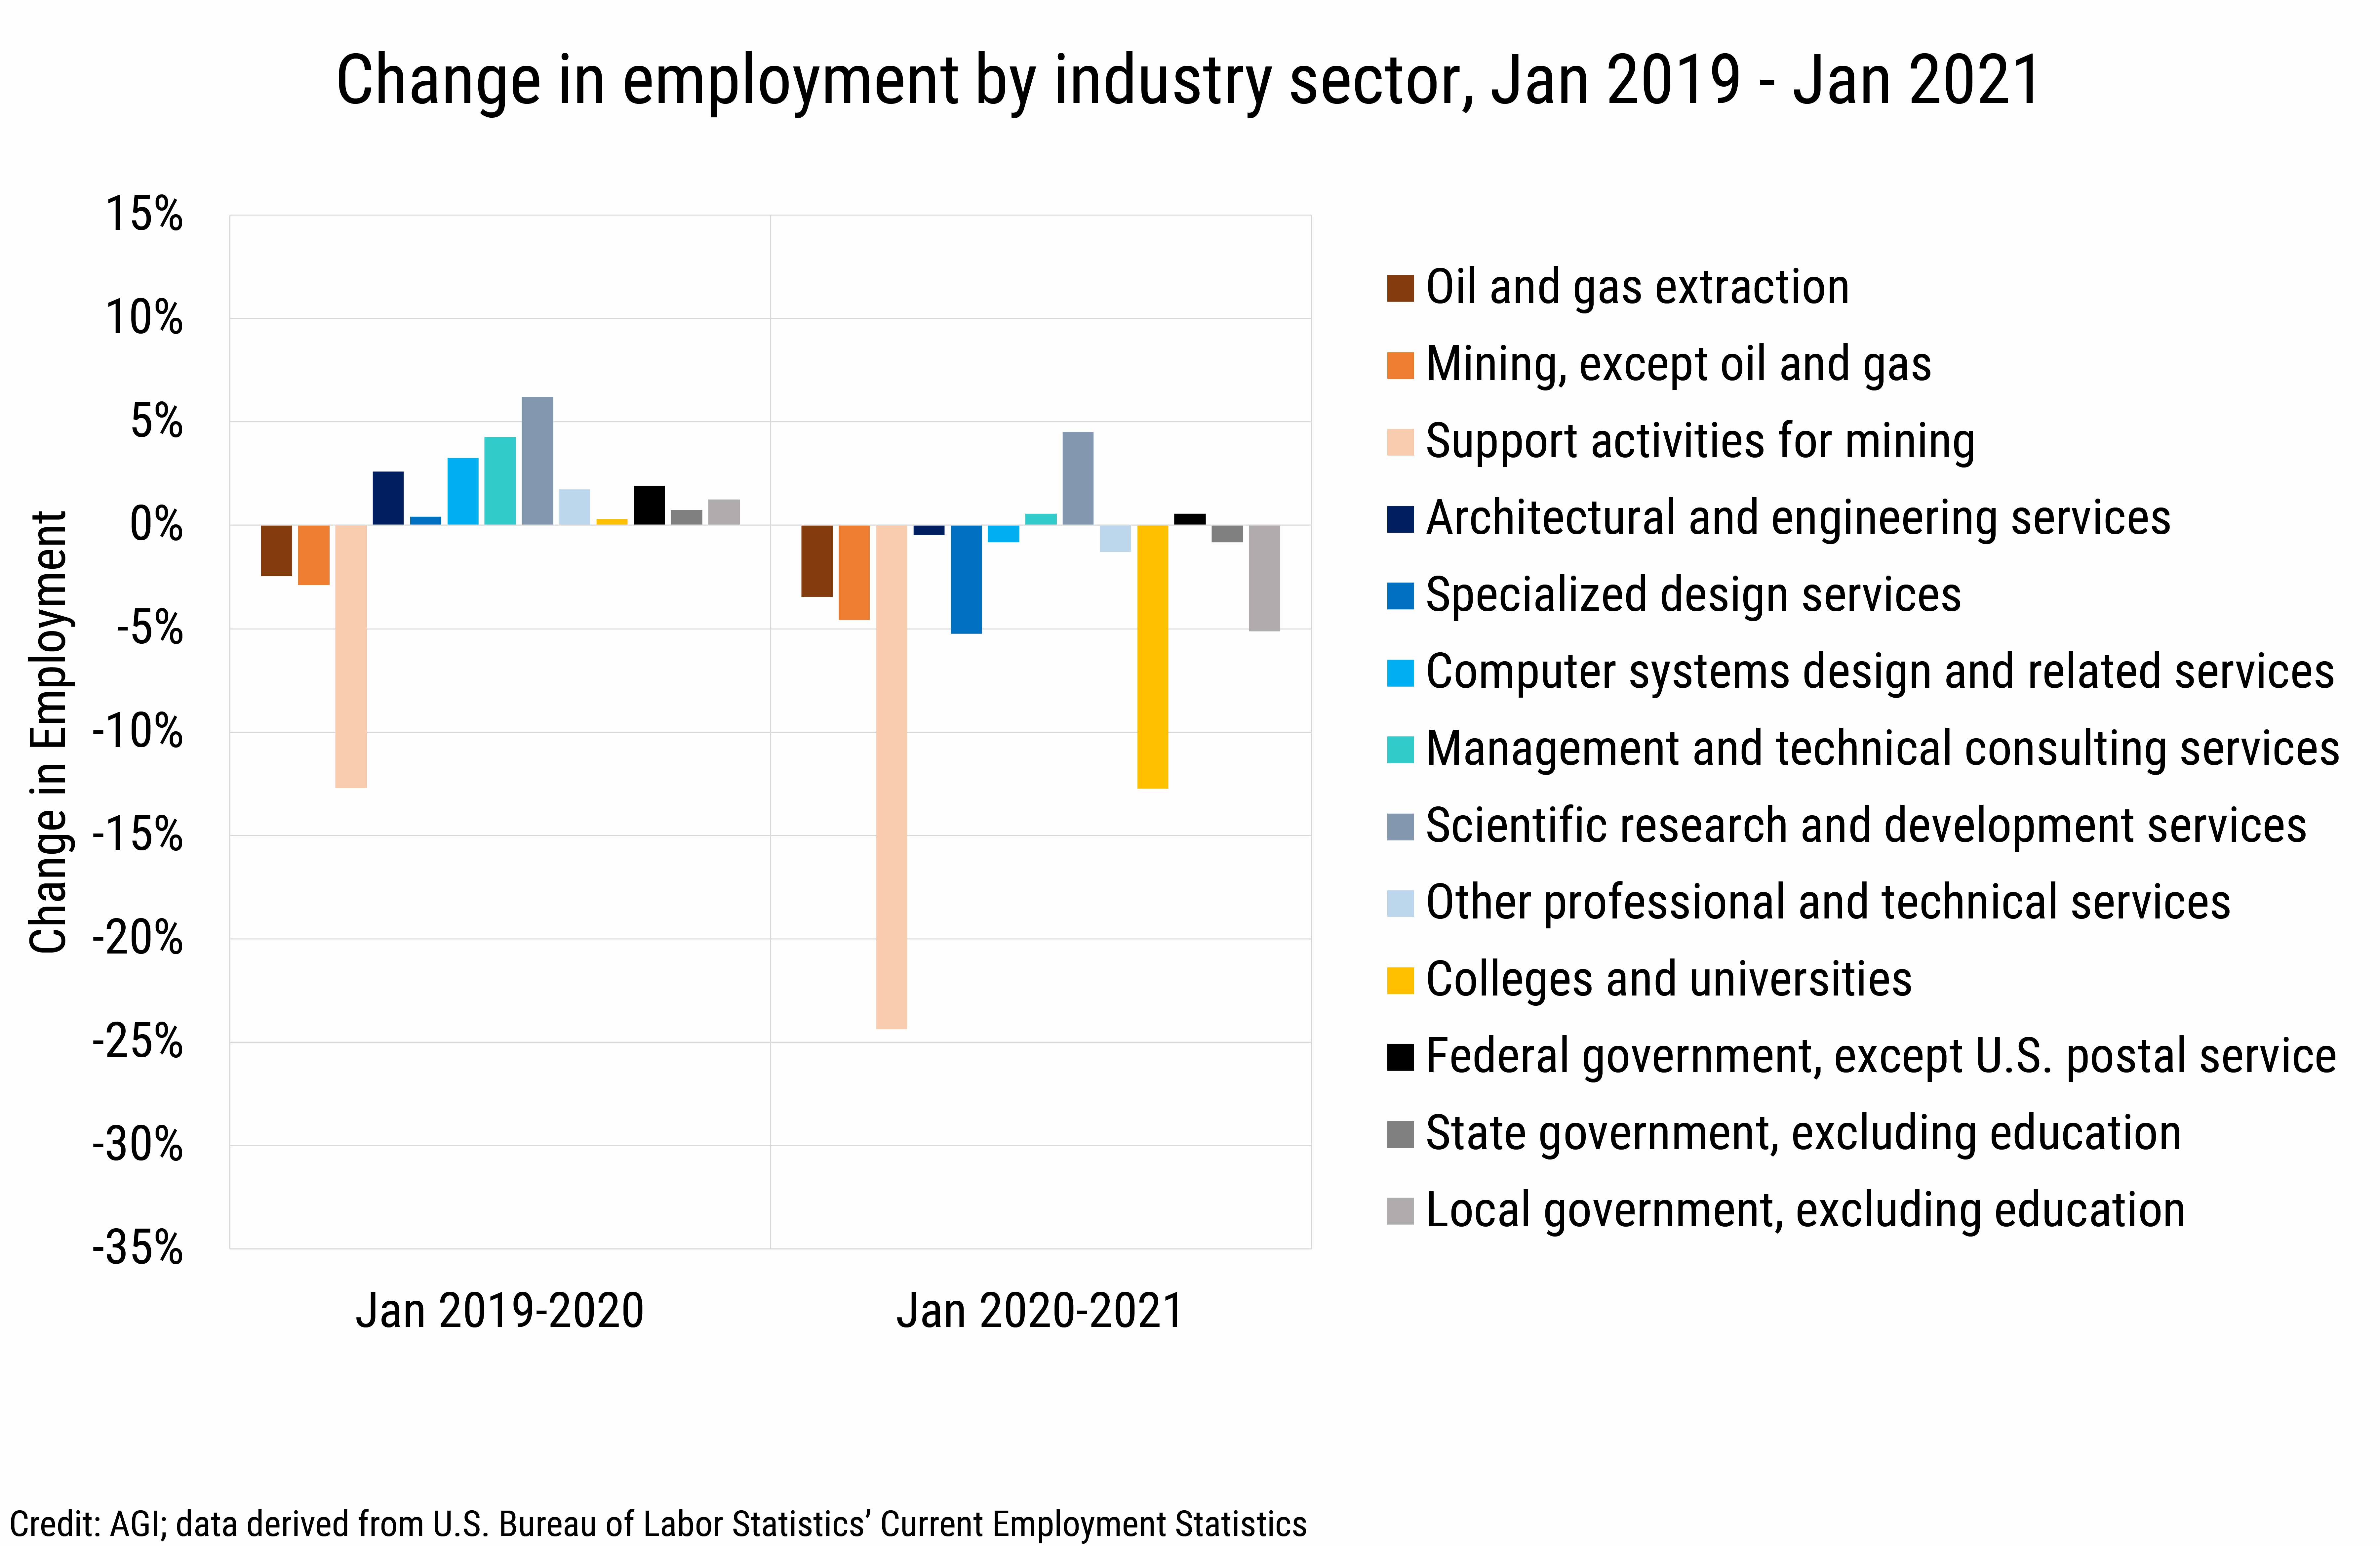 DB_2021-010 chart 04: Change in employment by industry sector, Jan 2019 - Jan 2021 (Credit: AGI, data derived from the U.S. Bureau of Labor Statistics, Current Employment Statistics)